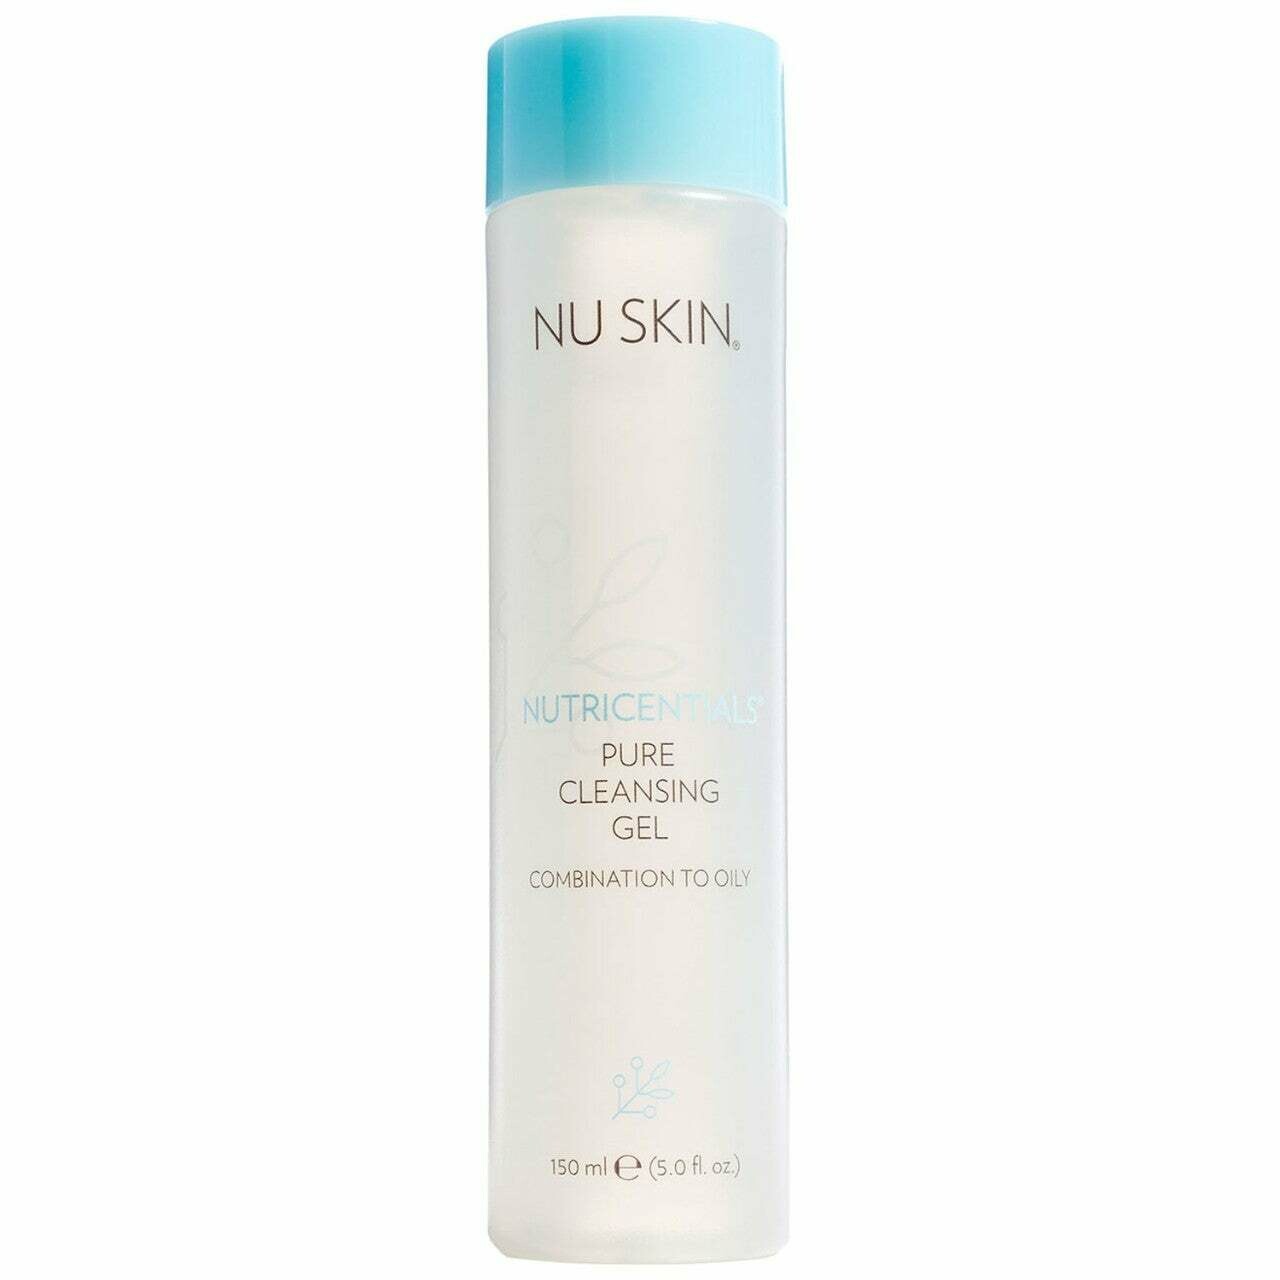 Pure Cleansing Gel (combination to oily)